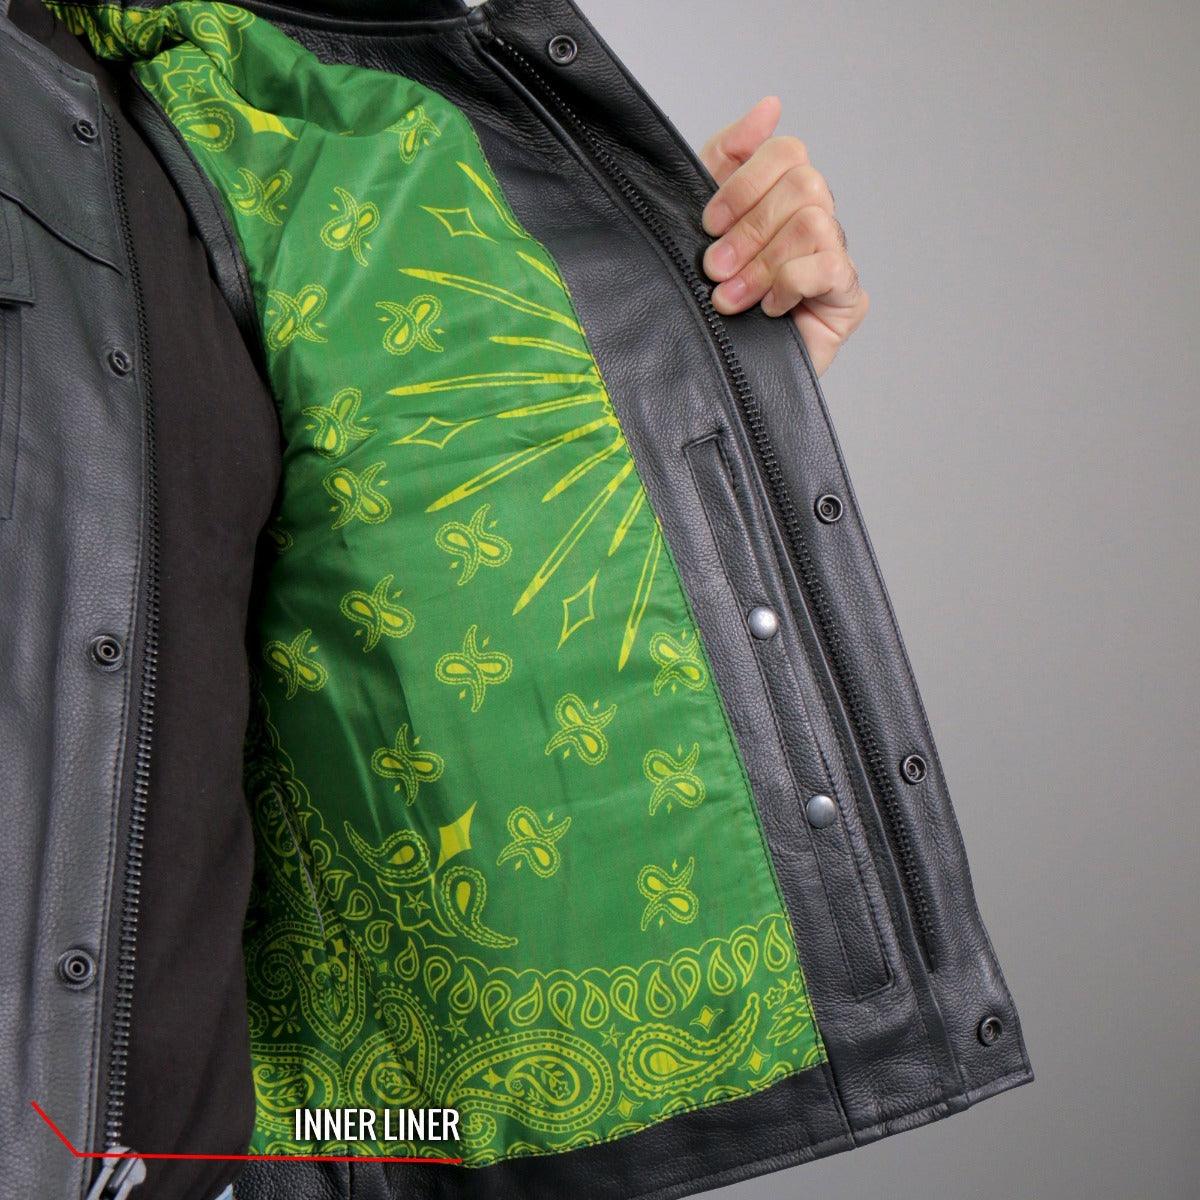 Hot Leathers Club Vest Paisley Green Liner Carry Conceal - American Legend Rider